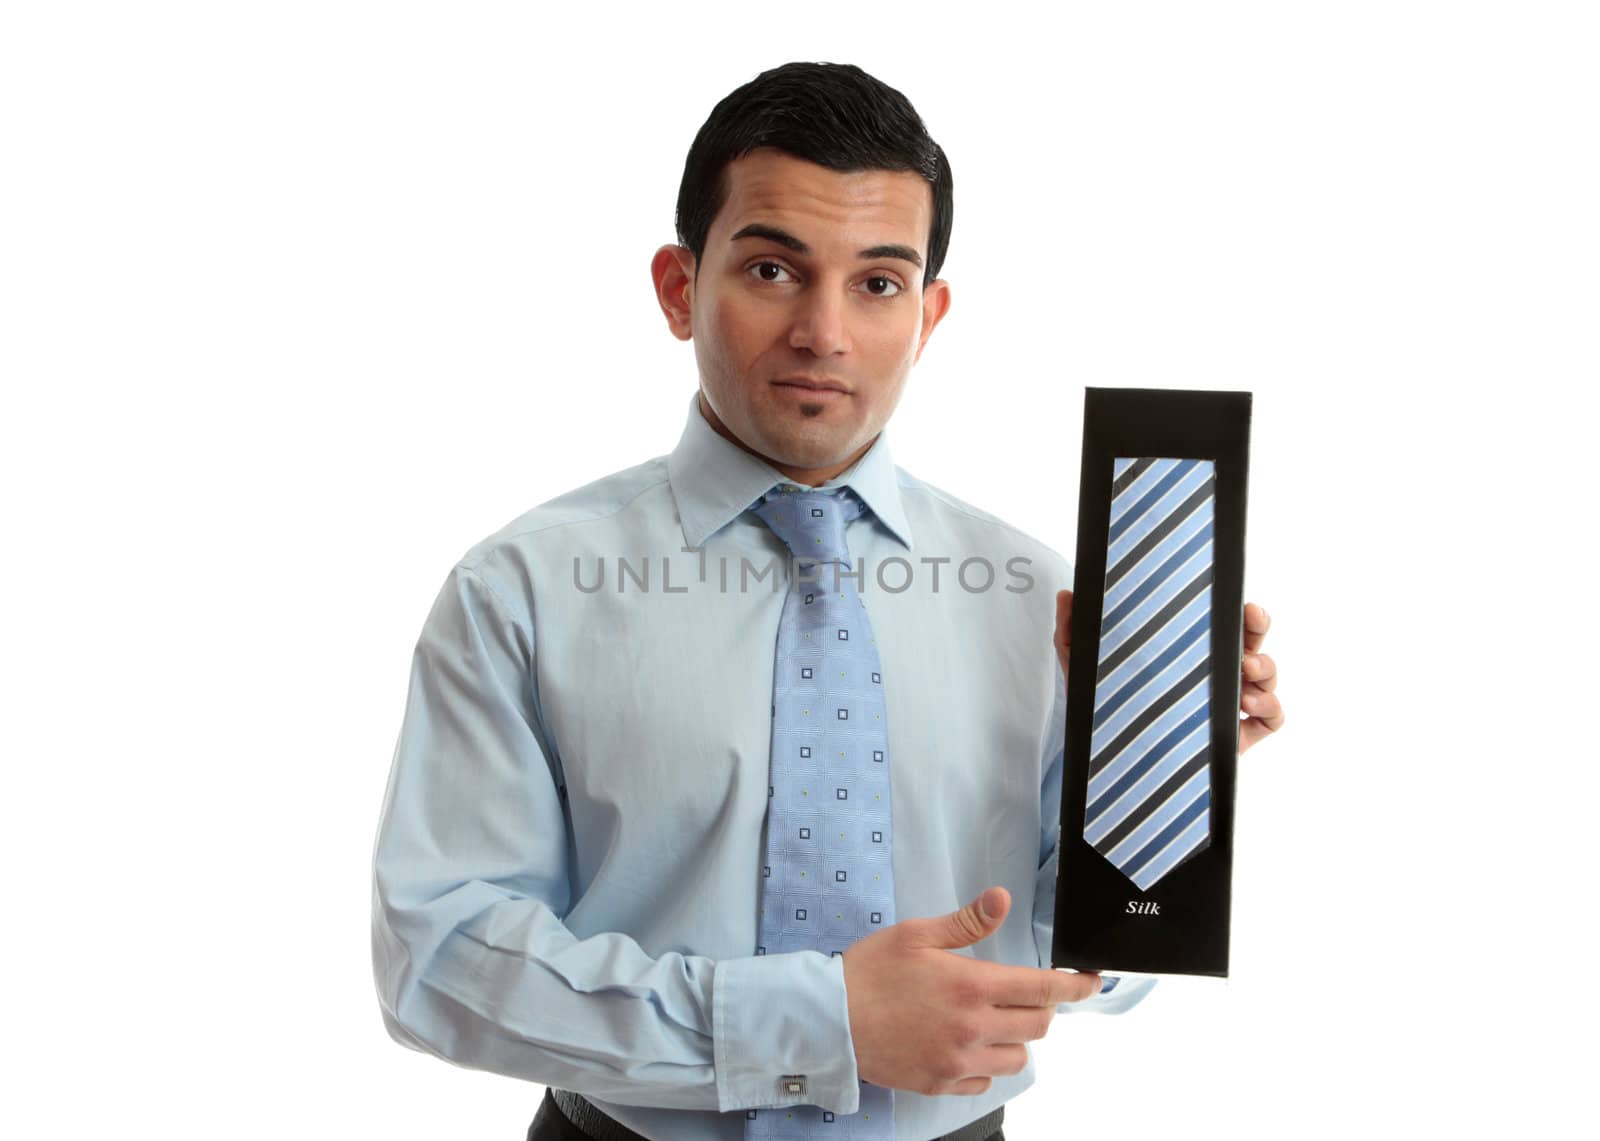 Salesman or businessman holding a tie - or can be other object.